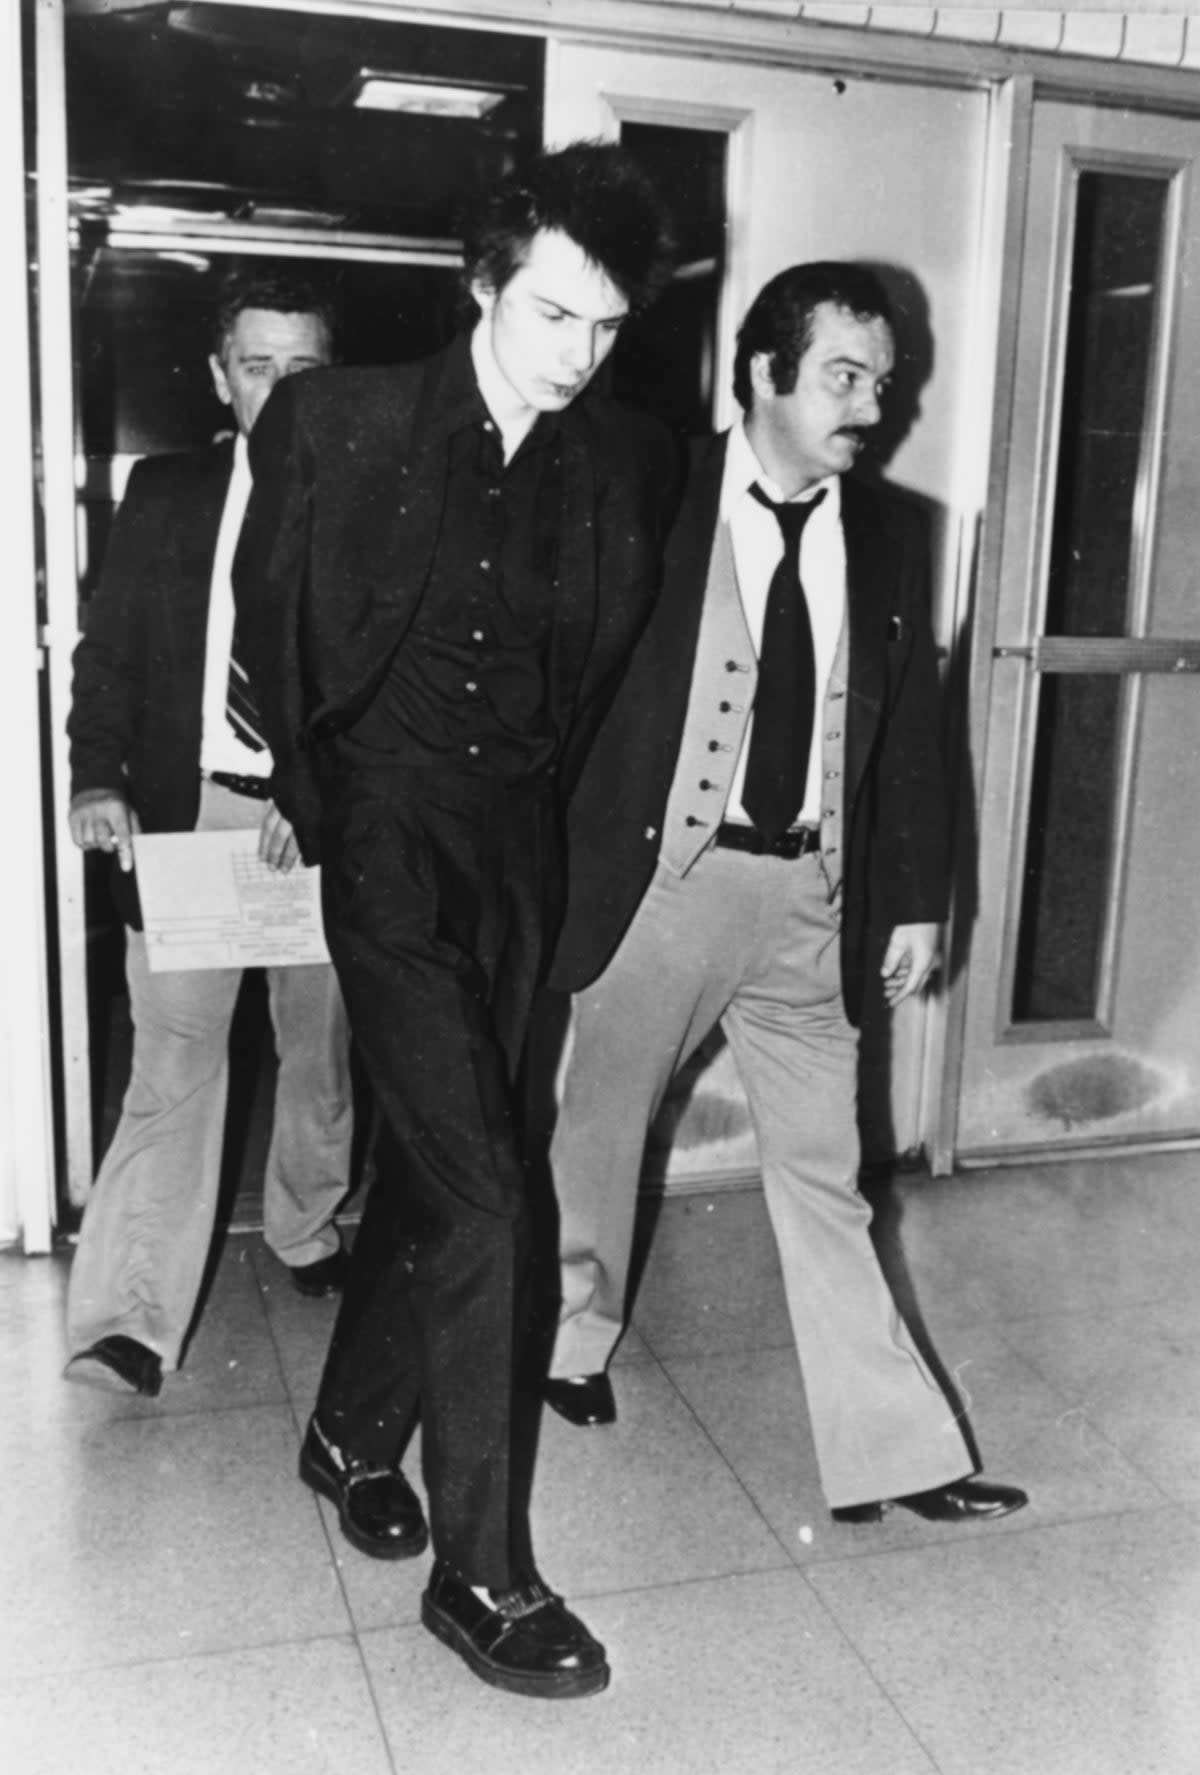 Sid Vicious is led away in police custody on a charge of murder after his girlfriend Nancy Spungen was found stabbed to death in a hotel room, New York City, November 1978 (Getty)